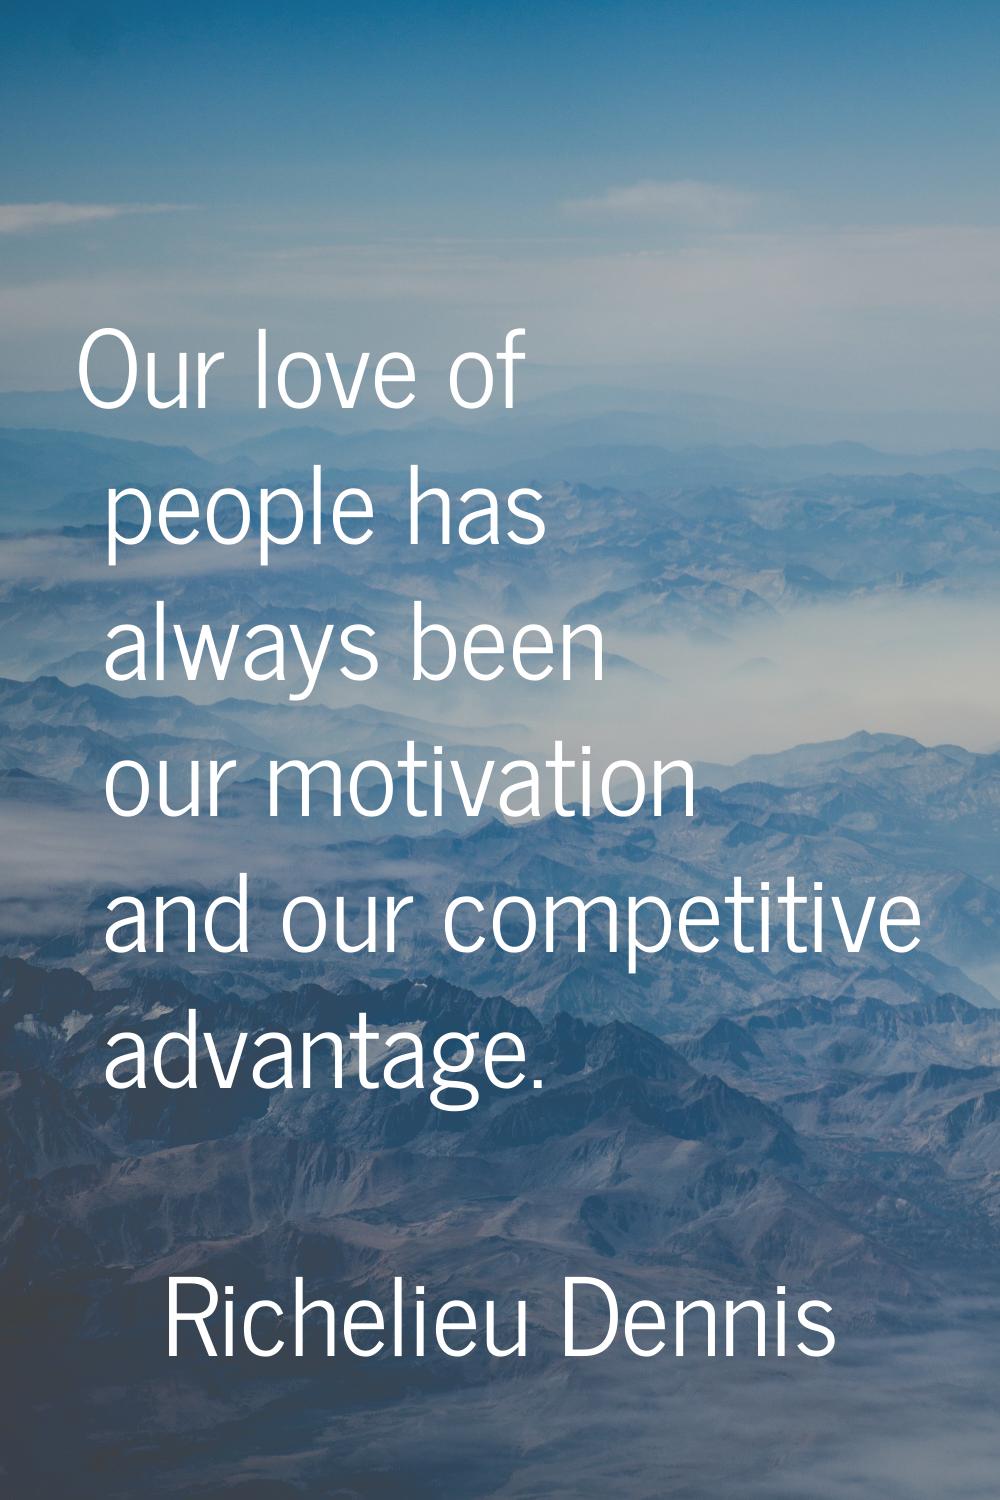 Our love of people has always been our motivation and our competitive advantage.